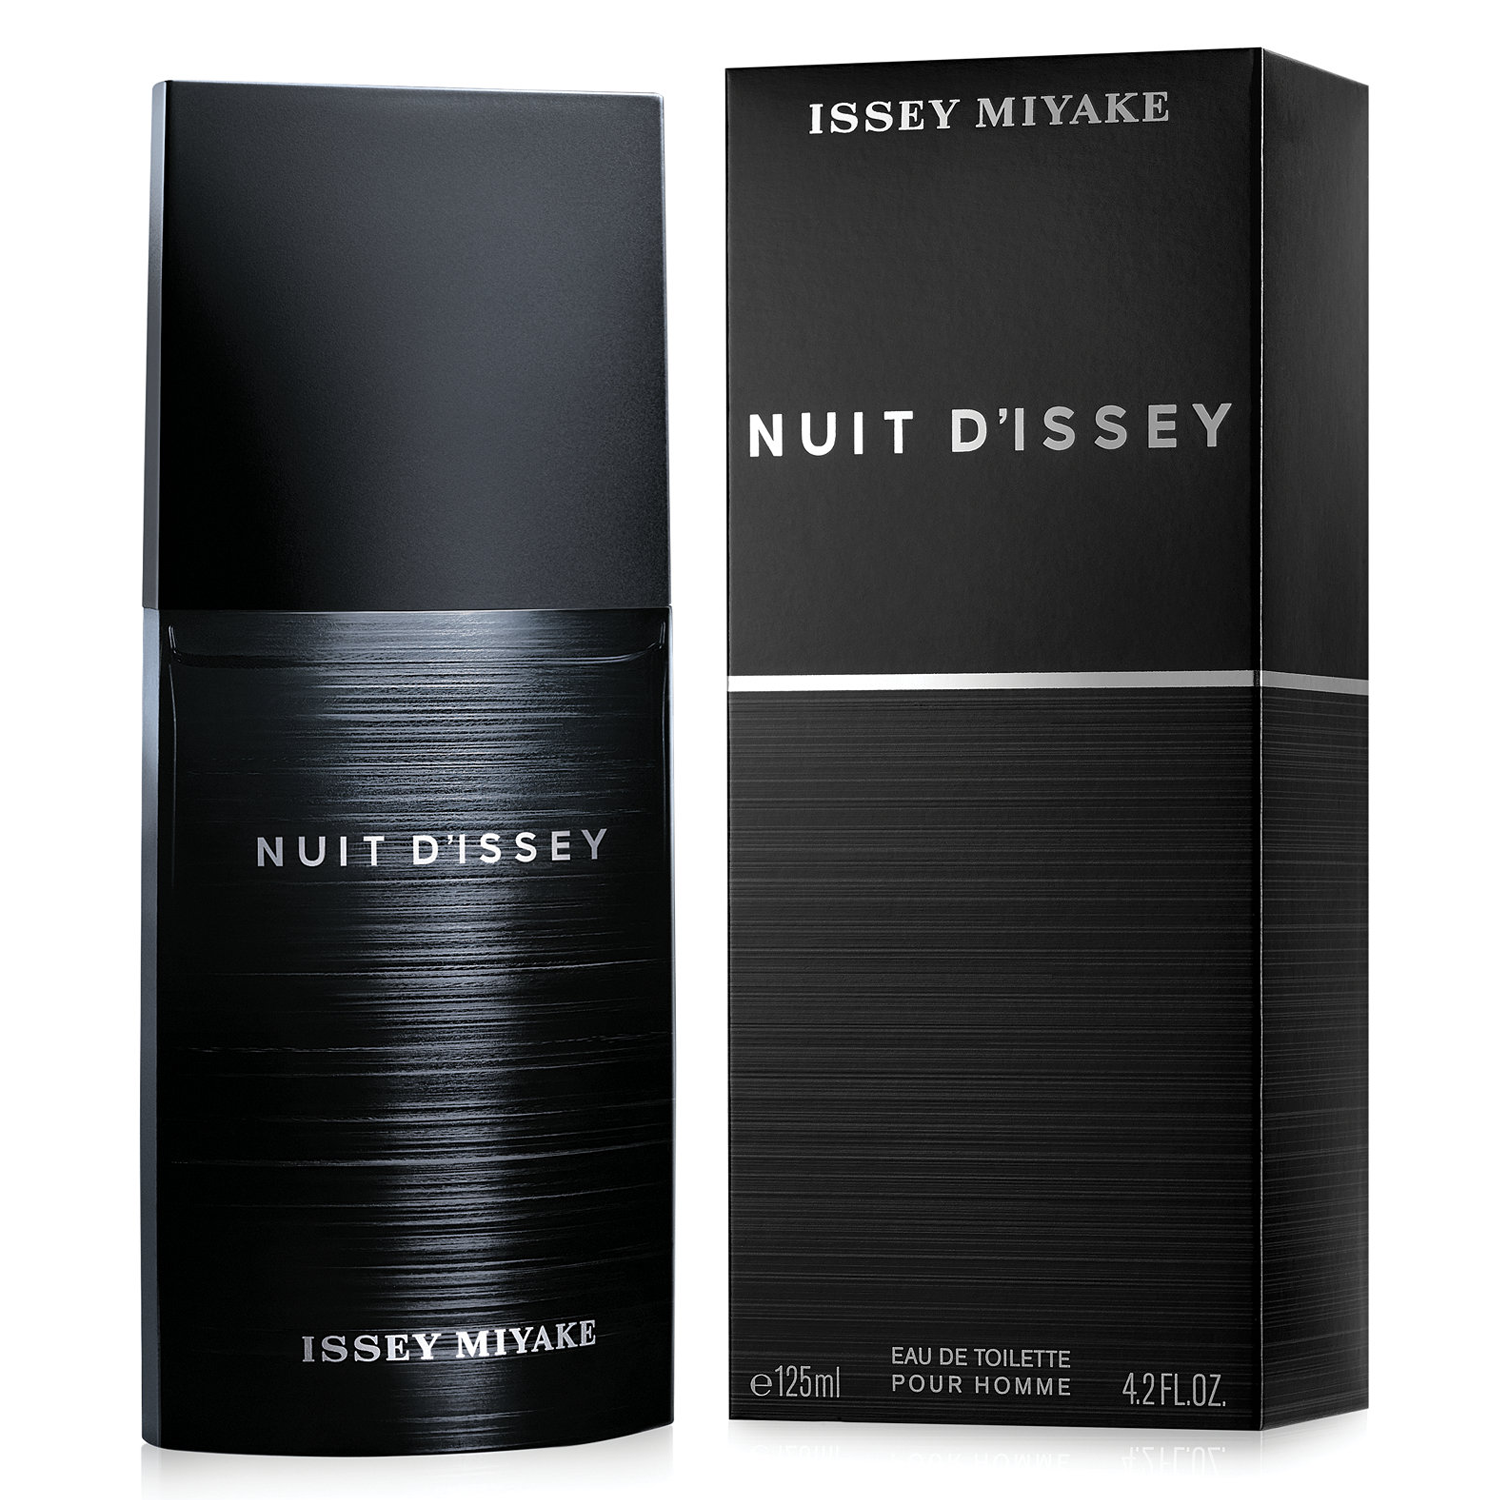 Issey Miyaki Nuit Edt Perfume in Canada stating from $30.00